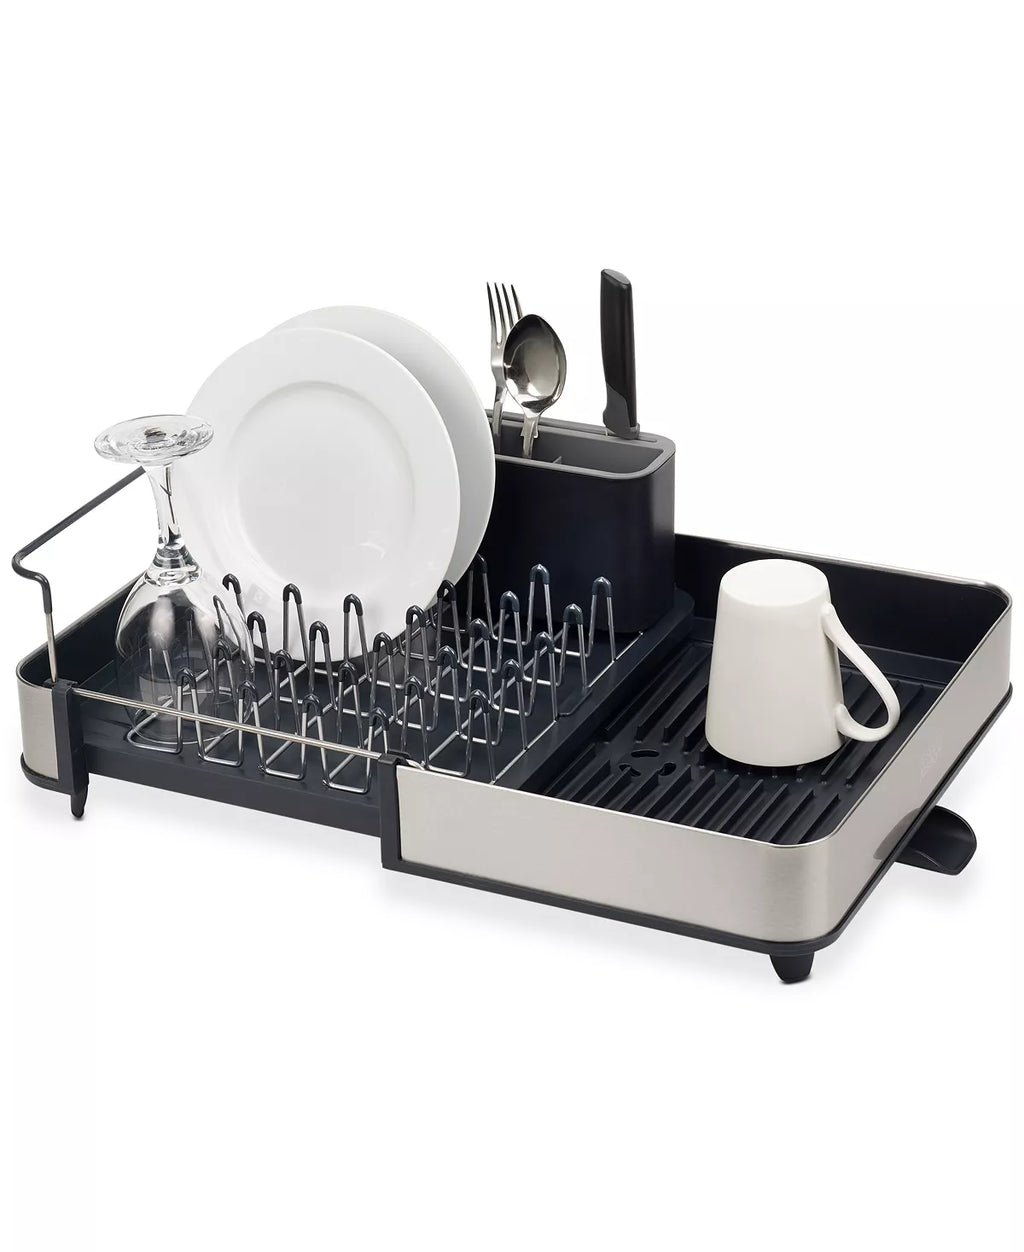 Dish Drying Rack, Mainstays Expandable Dish Rack with Utensil